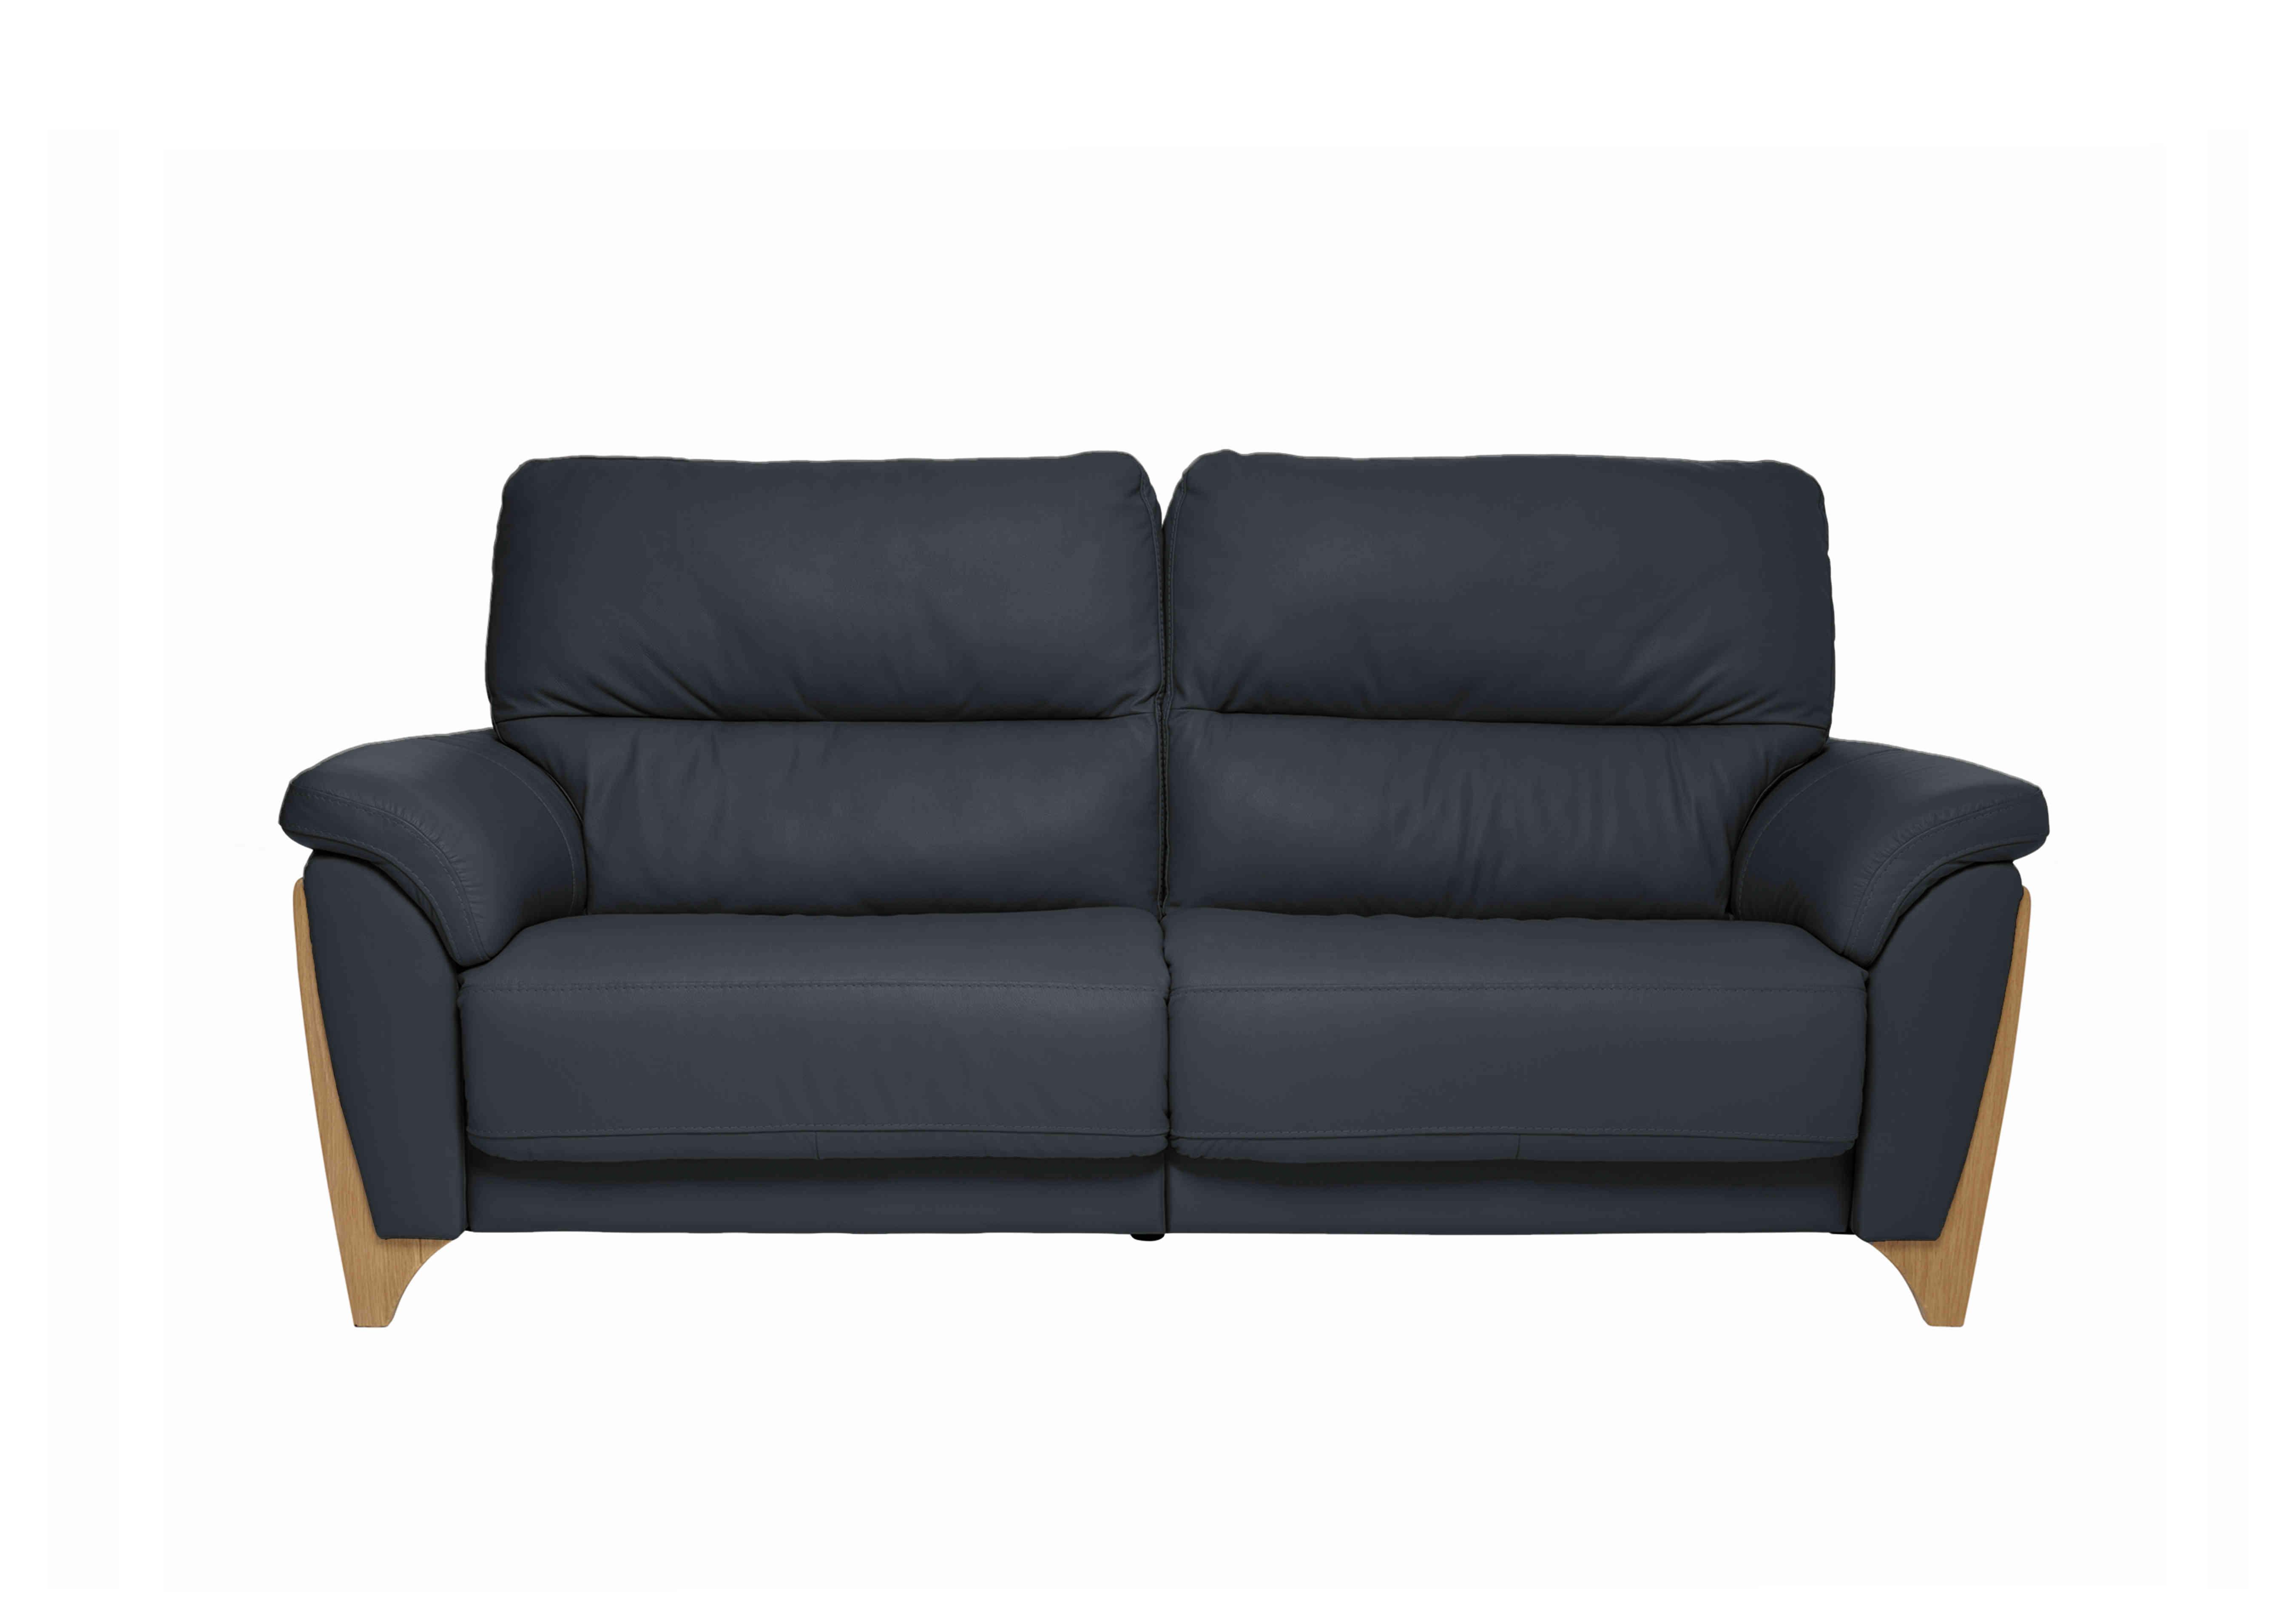 Enna Large Leather Power Recliner Sofa in L908 on Furniture Village